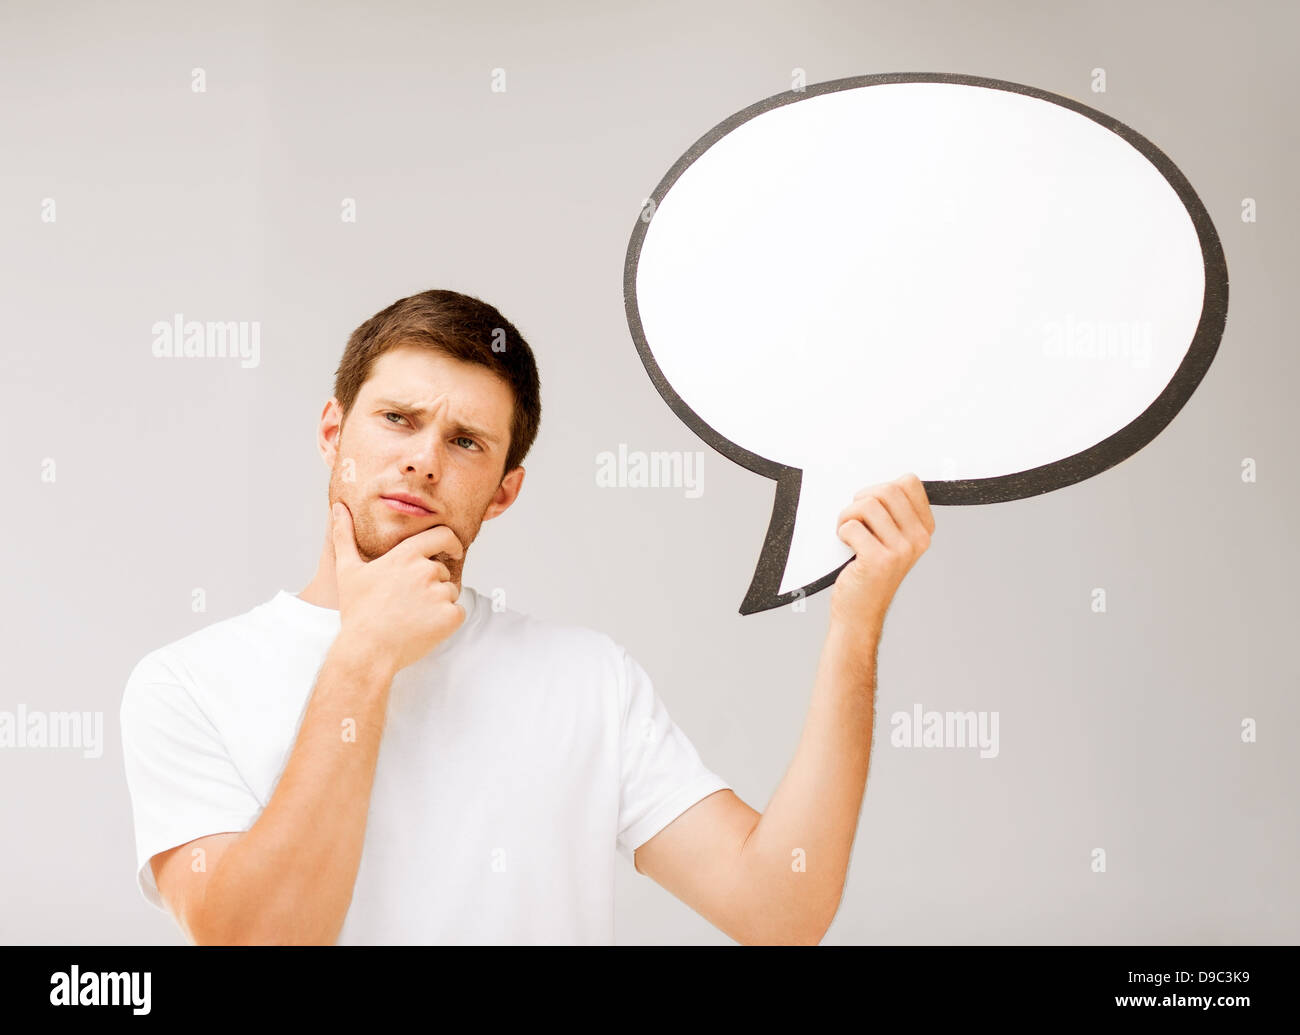 young man with blank text bubble Stock Photo